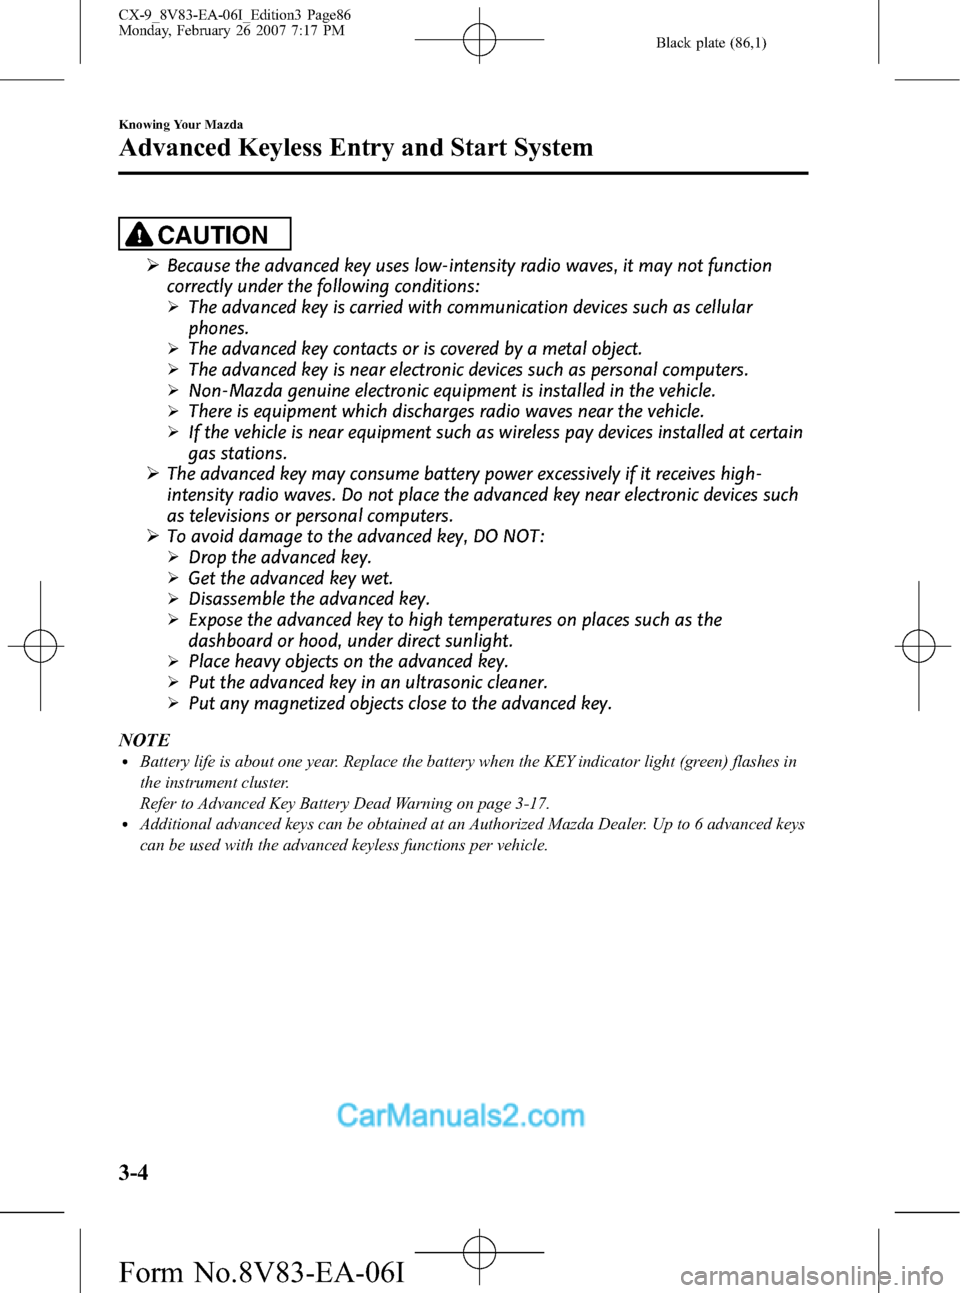 MAZDA MODEL CX-9 2007  Owners Manual (in English) Black plate (86,1)
CAUTION
ØBecause the advanced key uses low-intensity radio waves, it may not function
correctly under the following conditions:
ØThe advanced key is carried with communication dev